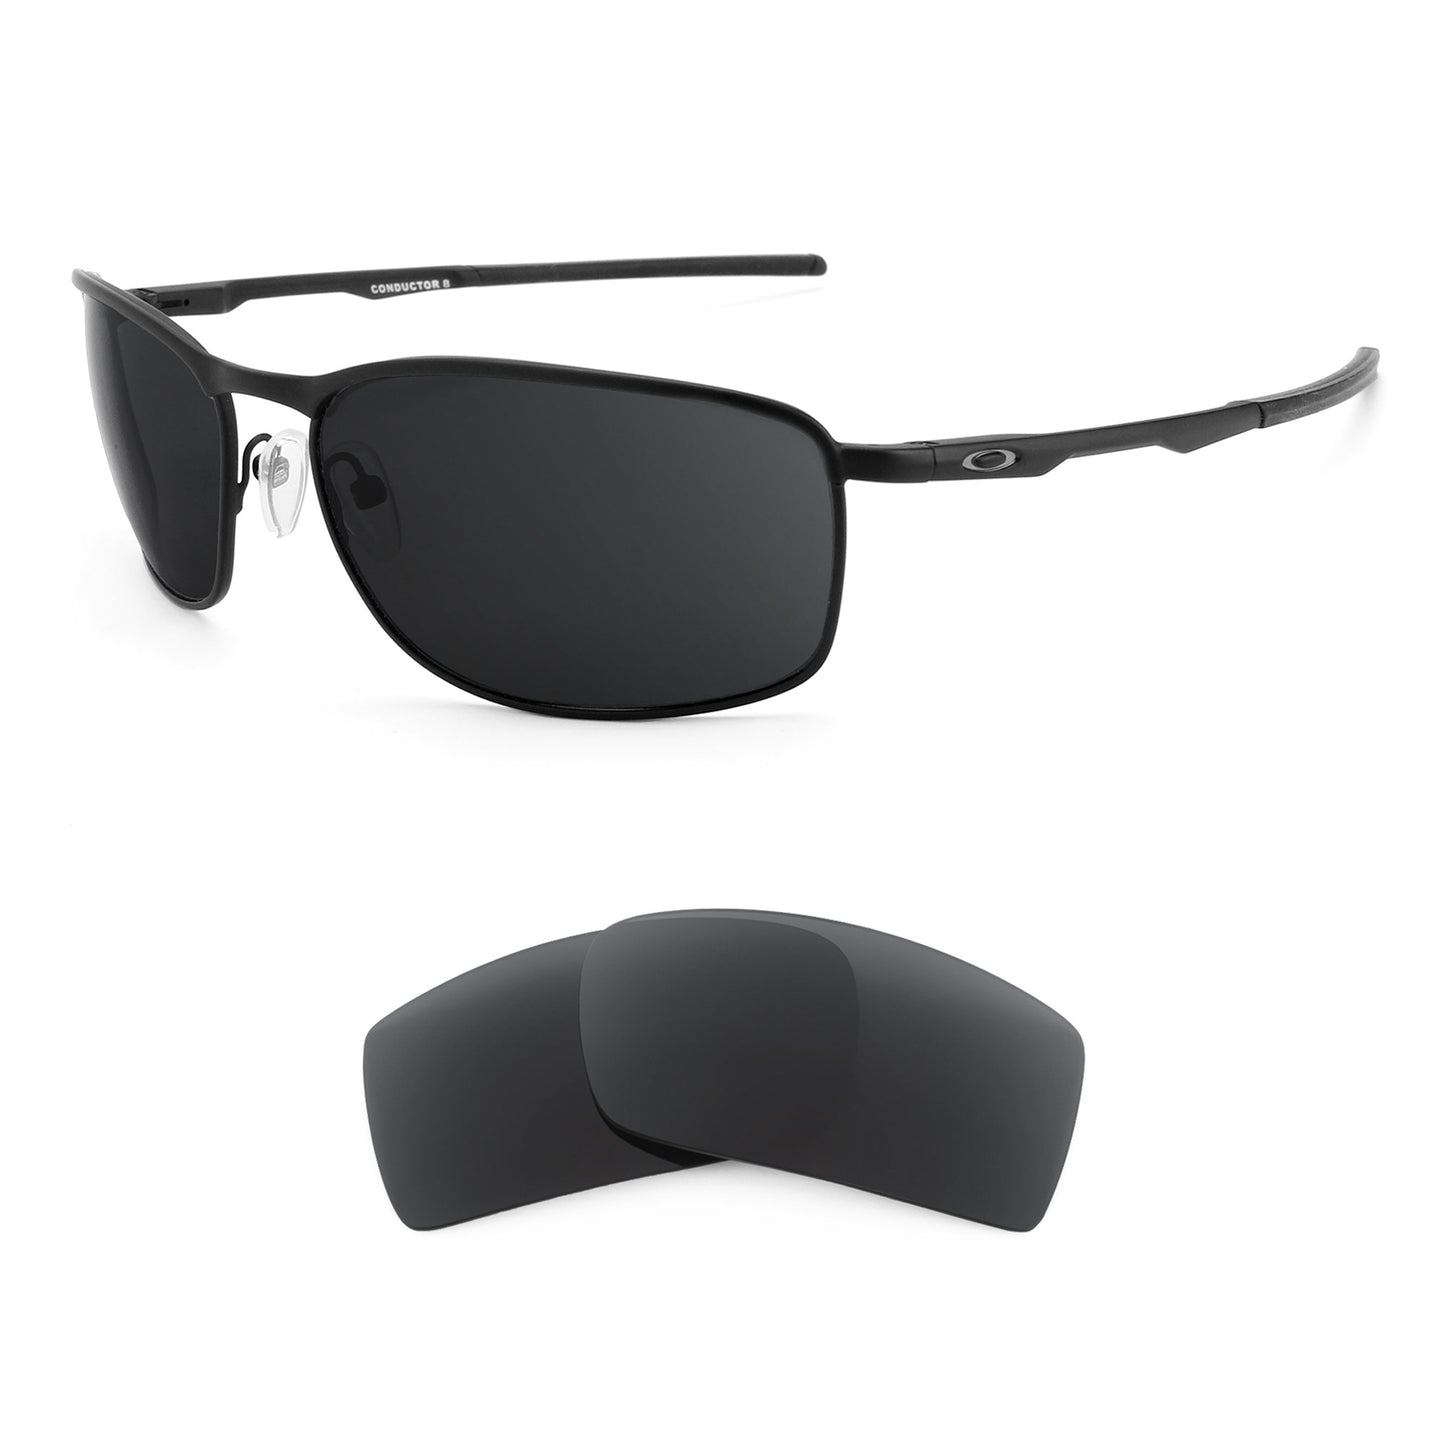 Oakley Conductor 8 sunglasses with replacement lenses